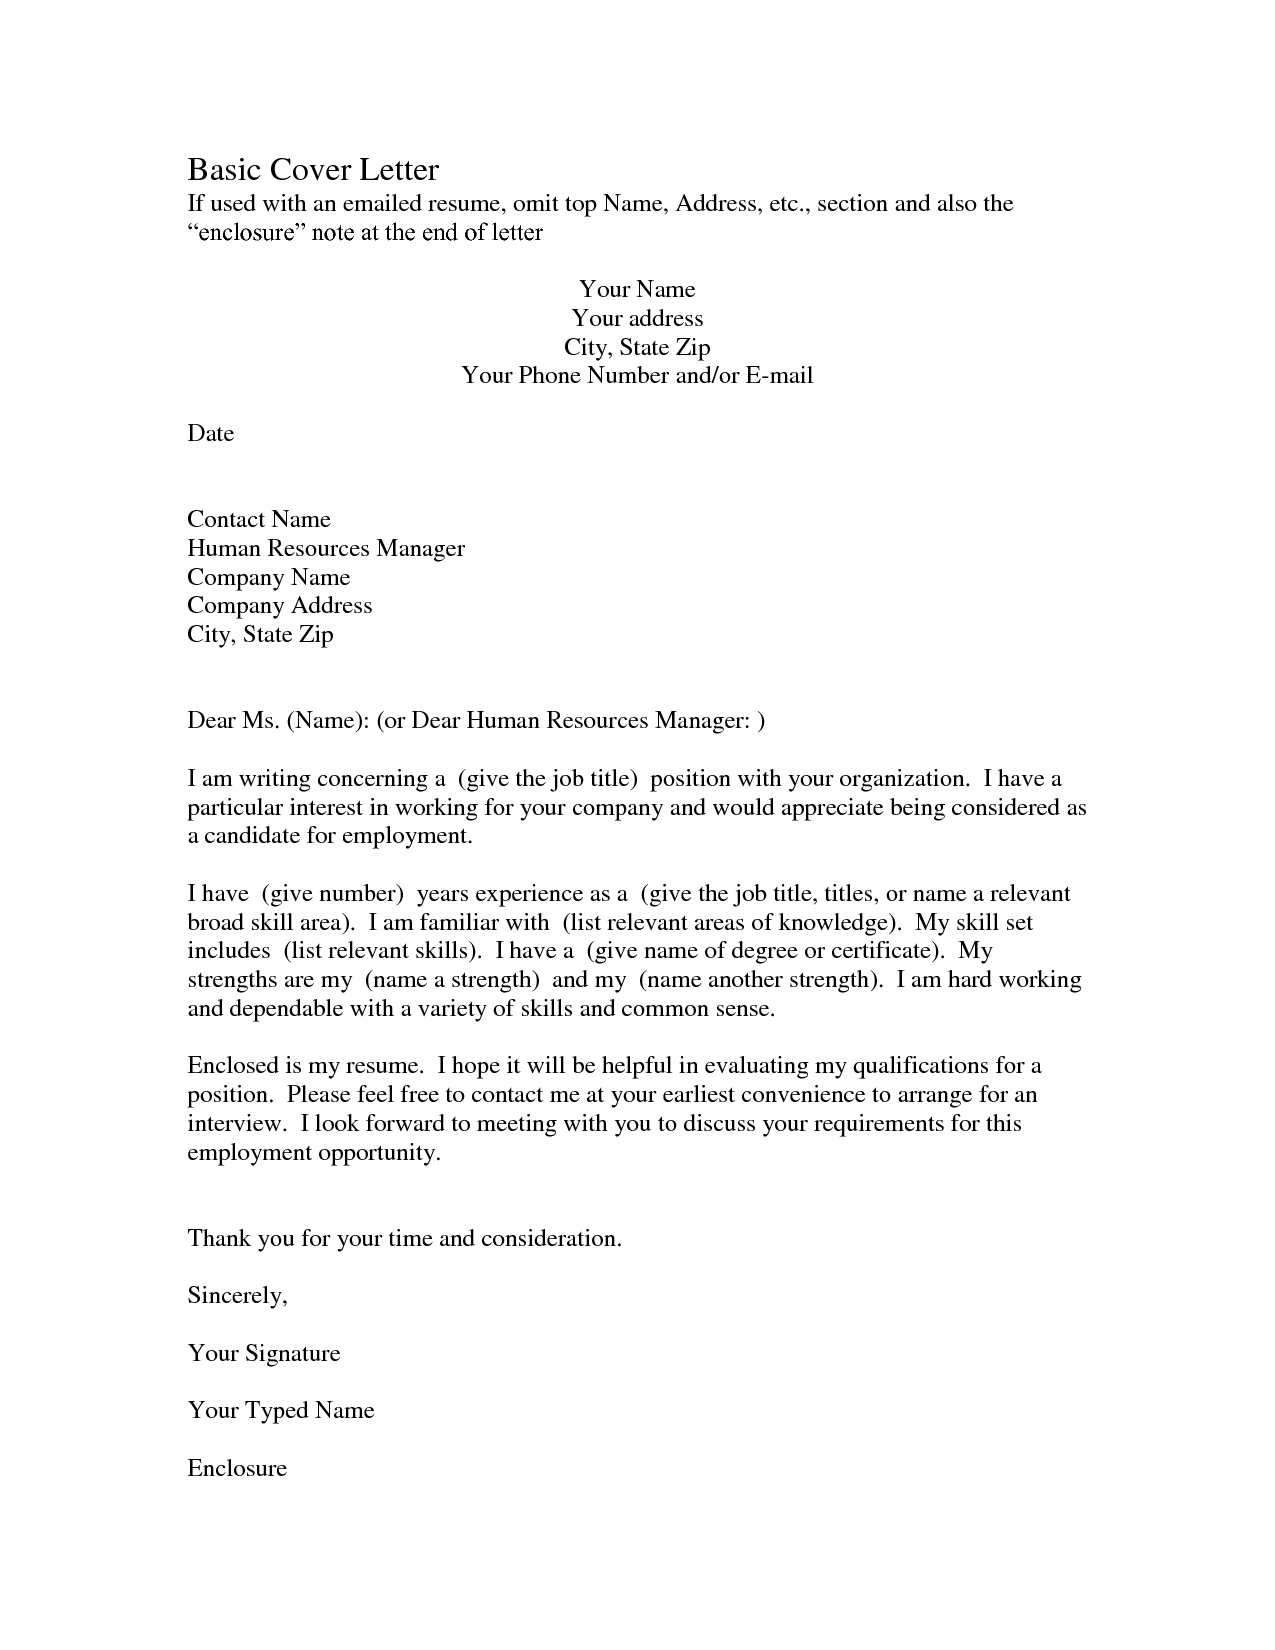 Cfo Cover Letter Template - This Cover Letter Sample Shows How A Resumes for Teachers Can Help